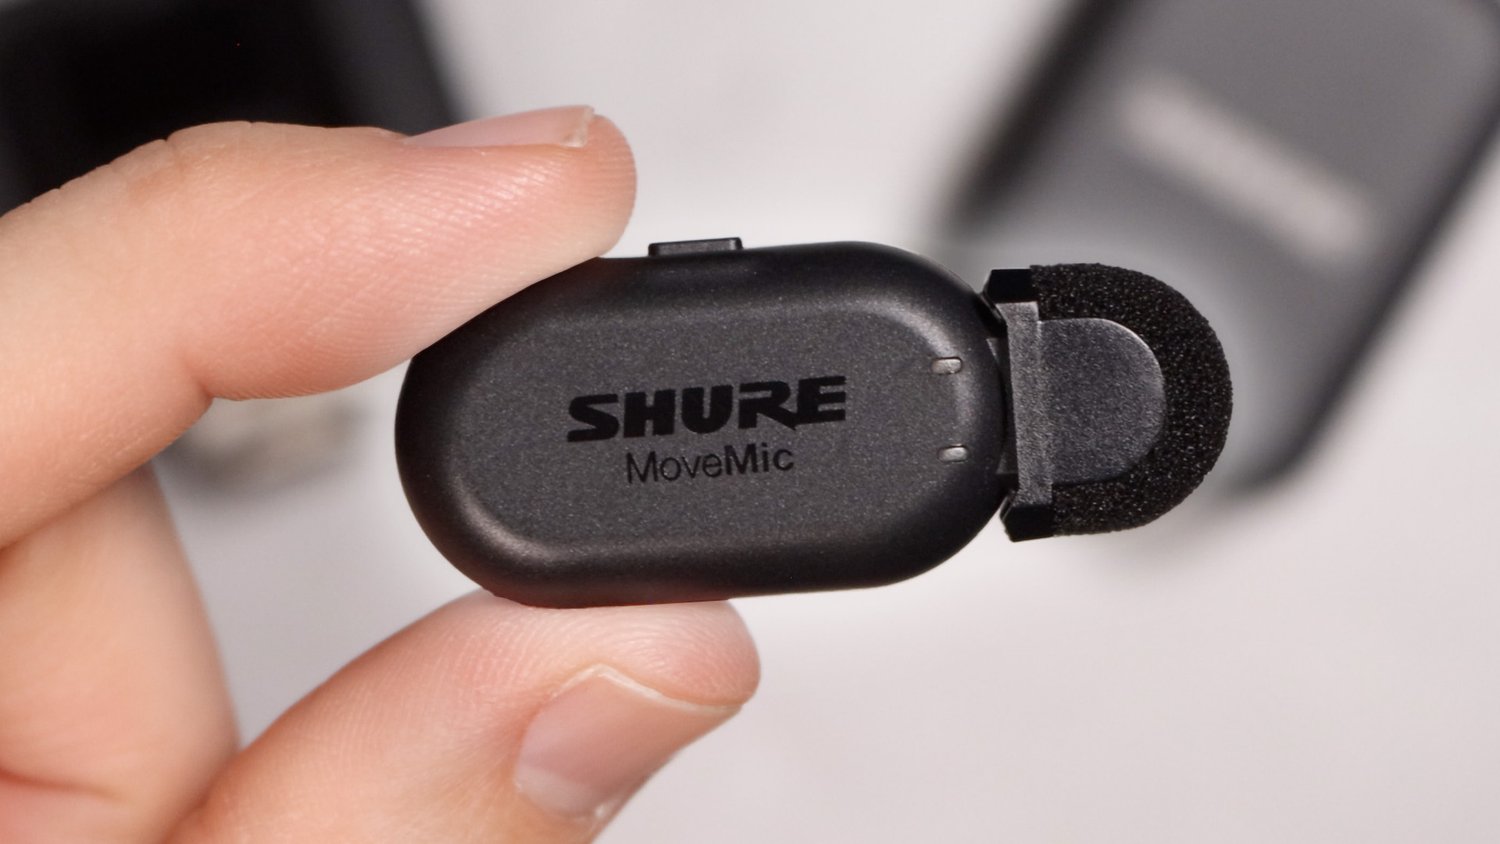 Shure MoveMic Review / Test